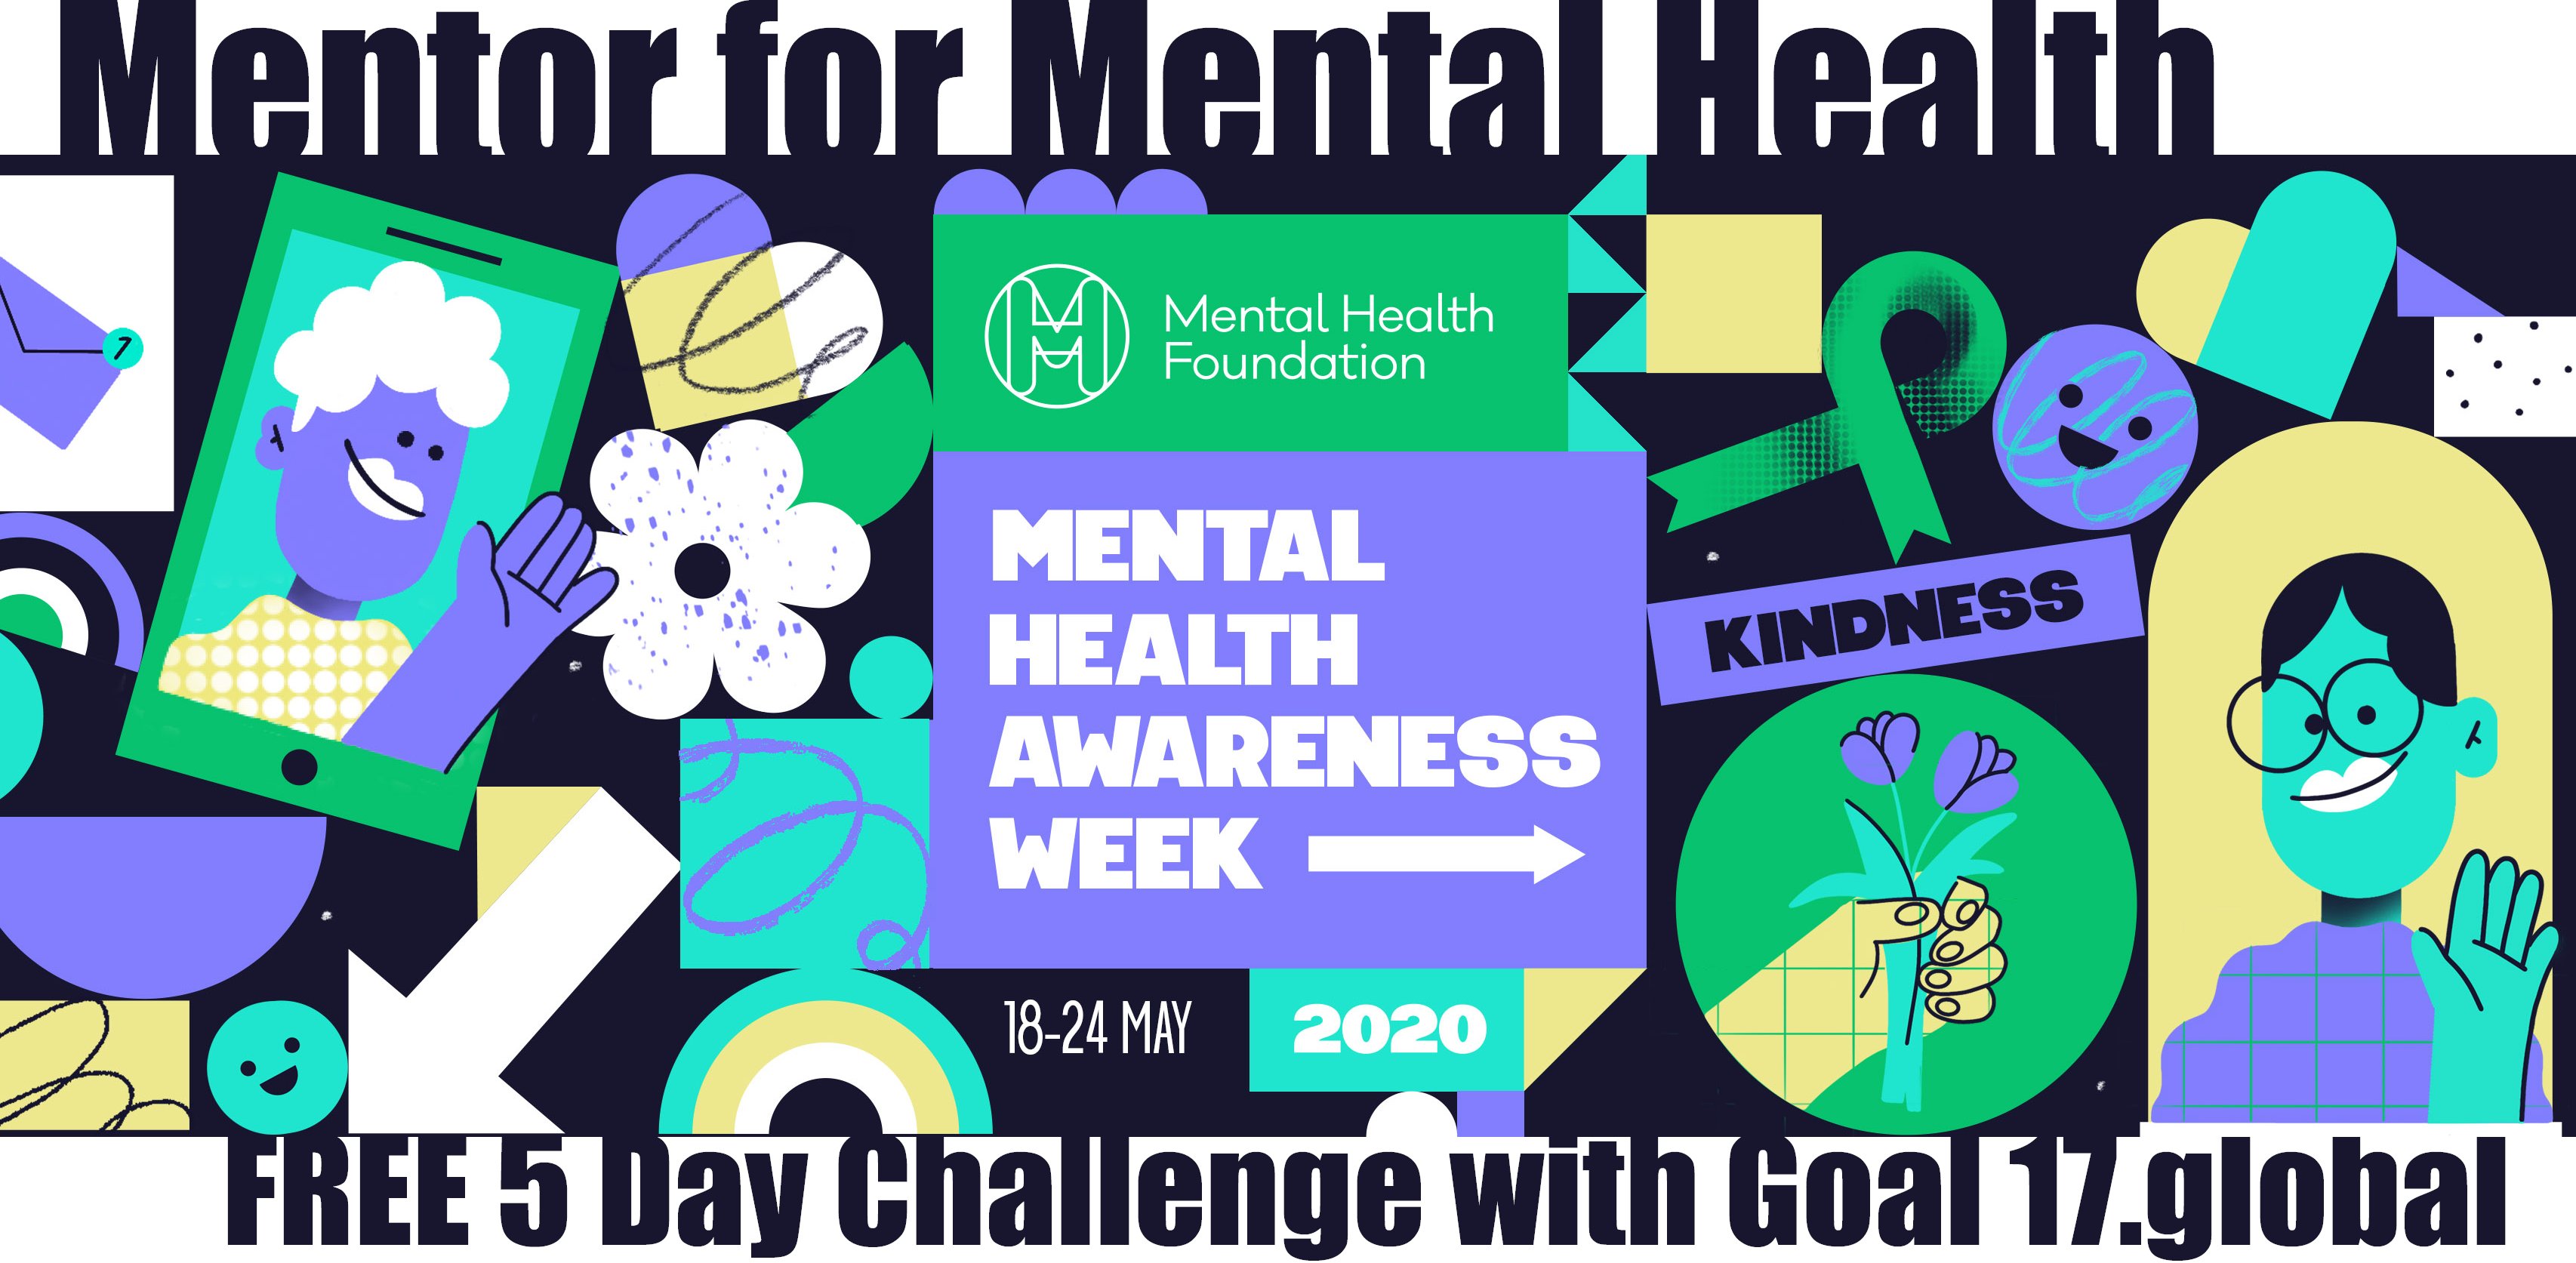 Frisør ~ side helikopter Goal17 on Twitter: "FREE 5 day Mentor for Mental Health Challenge to  support #MentalHealthAwarenessWeek - discover the step by step process of # mentoring #kindness to improve both #mentor & mentee #mentalhealth. Learn